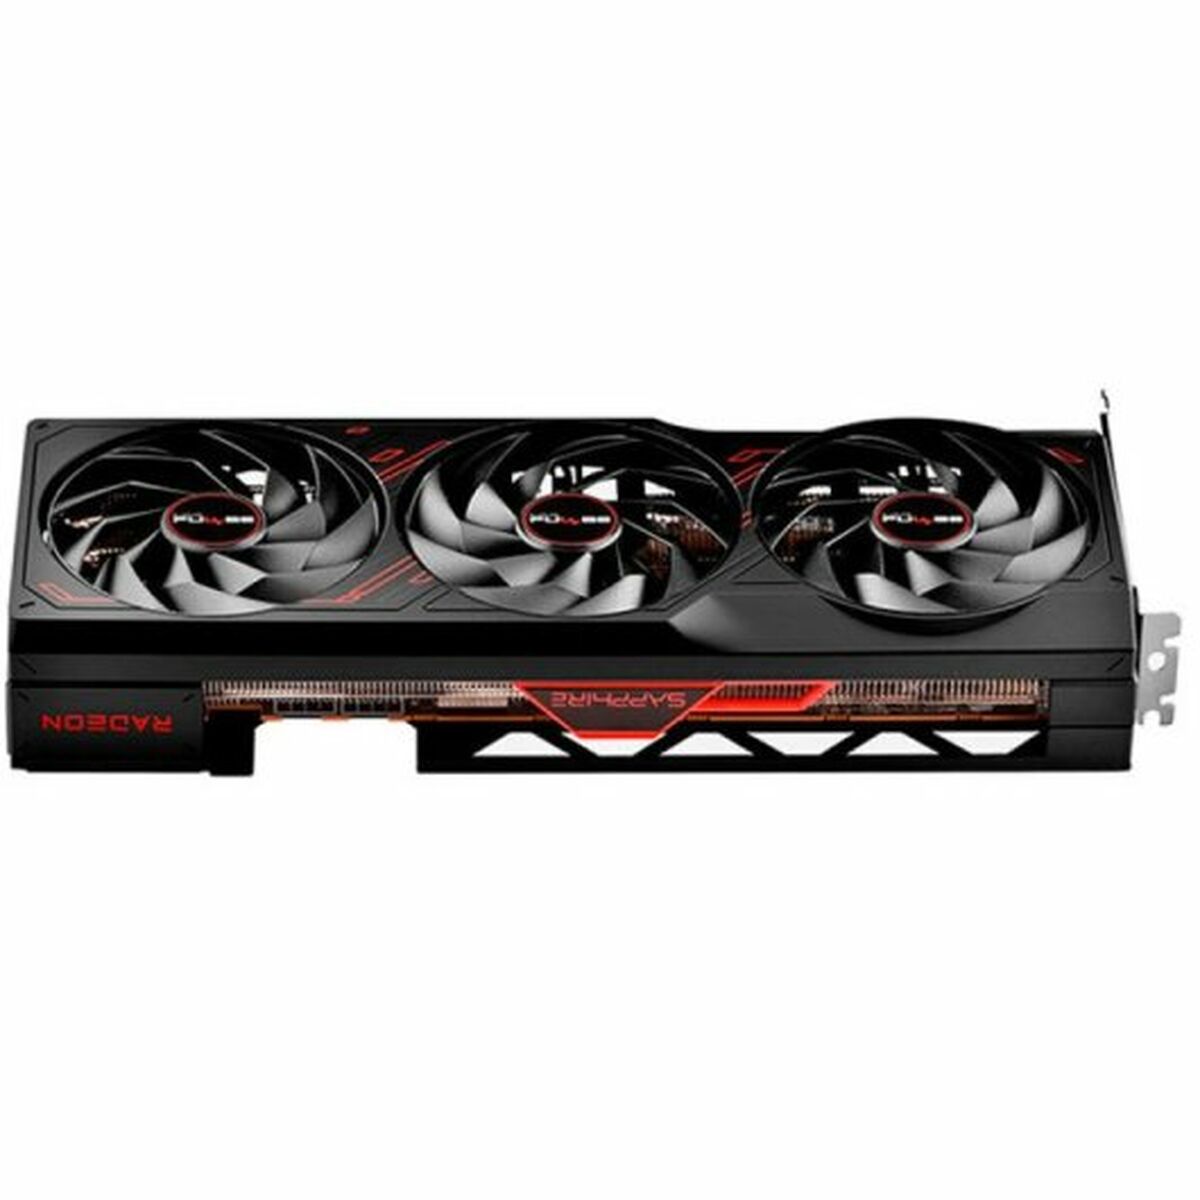 Graphics card Sapphire AMD Radeon Pulse RX 7900 GRE Gaming OC 16 GB GDDR6, Sapphire, Computing, Components, graphics-card-sapphire-amd-radeon-pulse-rx-7900-gre-gaming-oc-16-gb-gddr6, Brand_Sapphire, category-reference-2609, category-reference-2803, category-reference-2812, category-reference-t-19685, category-reference-t-19912, category-reference-t-21360, category-reference-t-25665, computers / components, Condition_NEW, Price_800 - 900, Teleworking, RiotNook